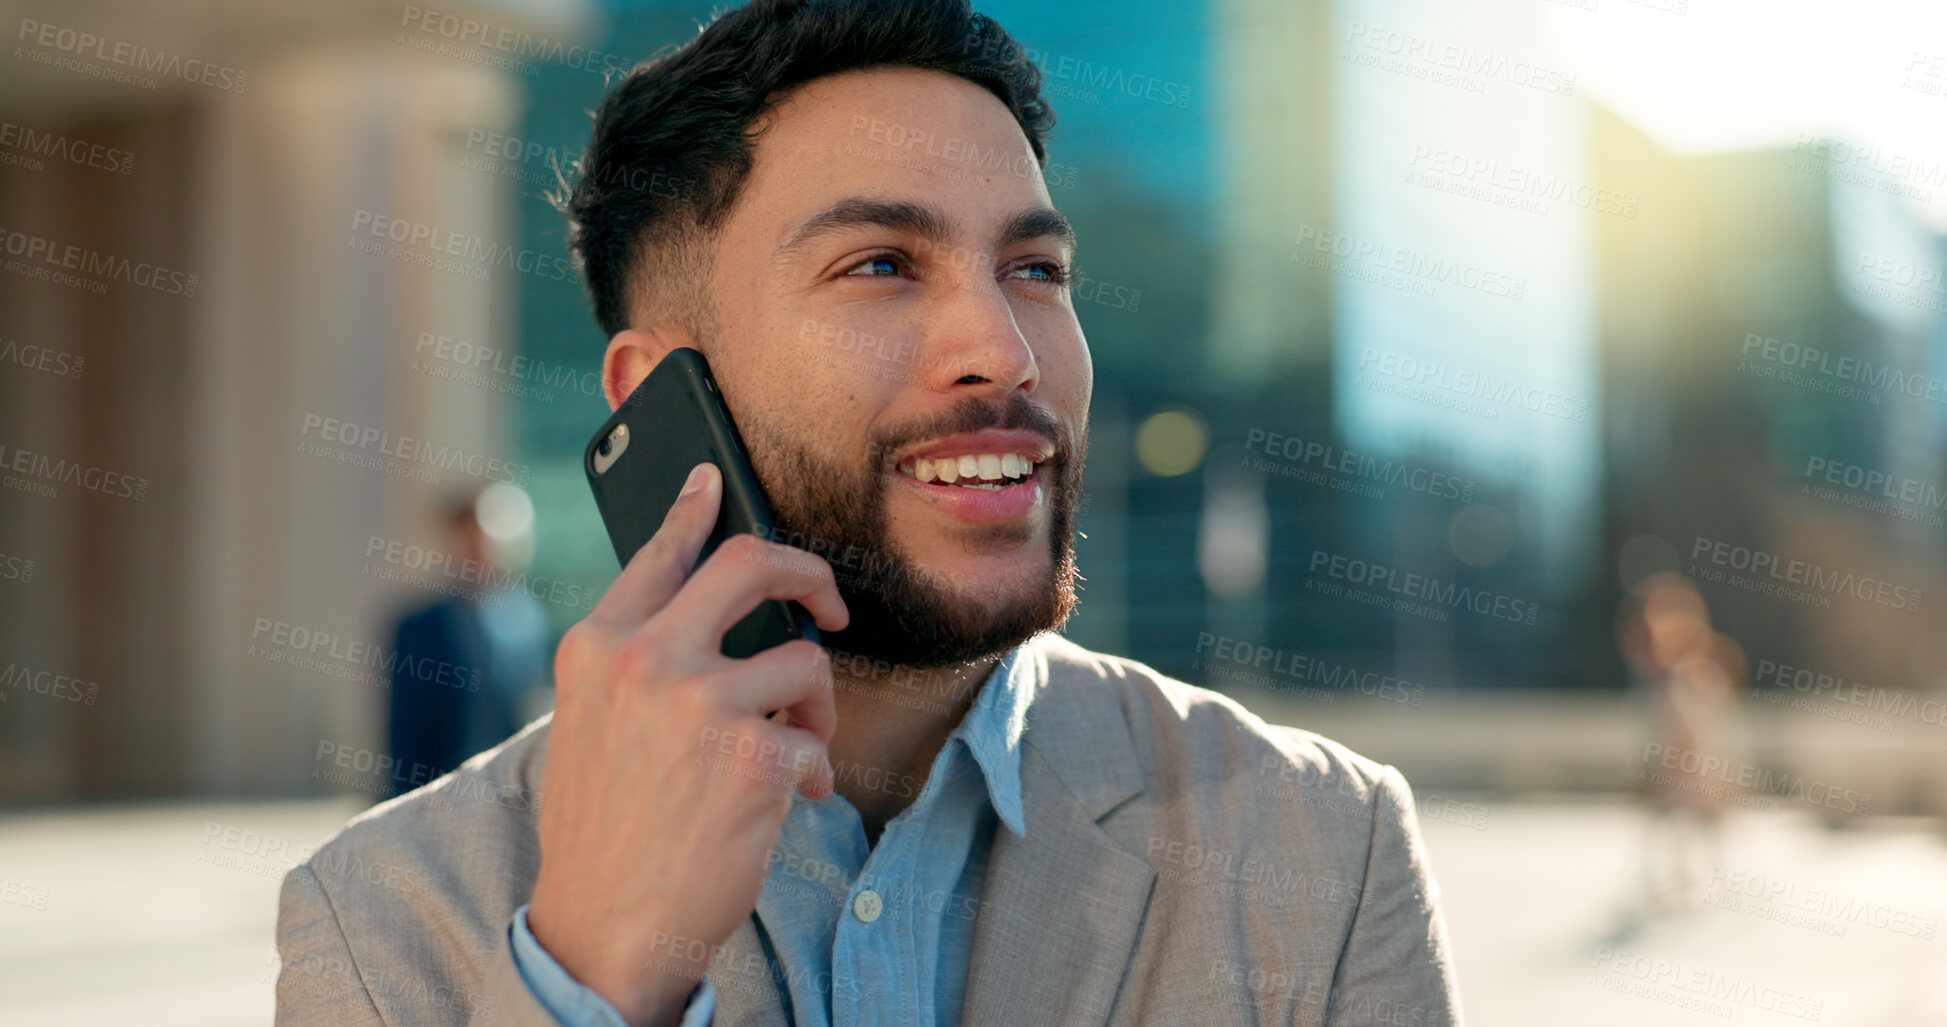 Buy stock photo Negotiation, city or happy businessman on a phone call talking, networking or speaking to chat. Mobile, communication or Arabic male entrepreneur in conversation, discussion or deal offer outdoors